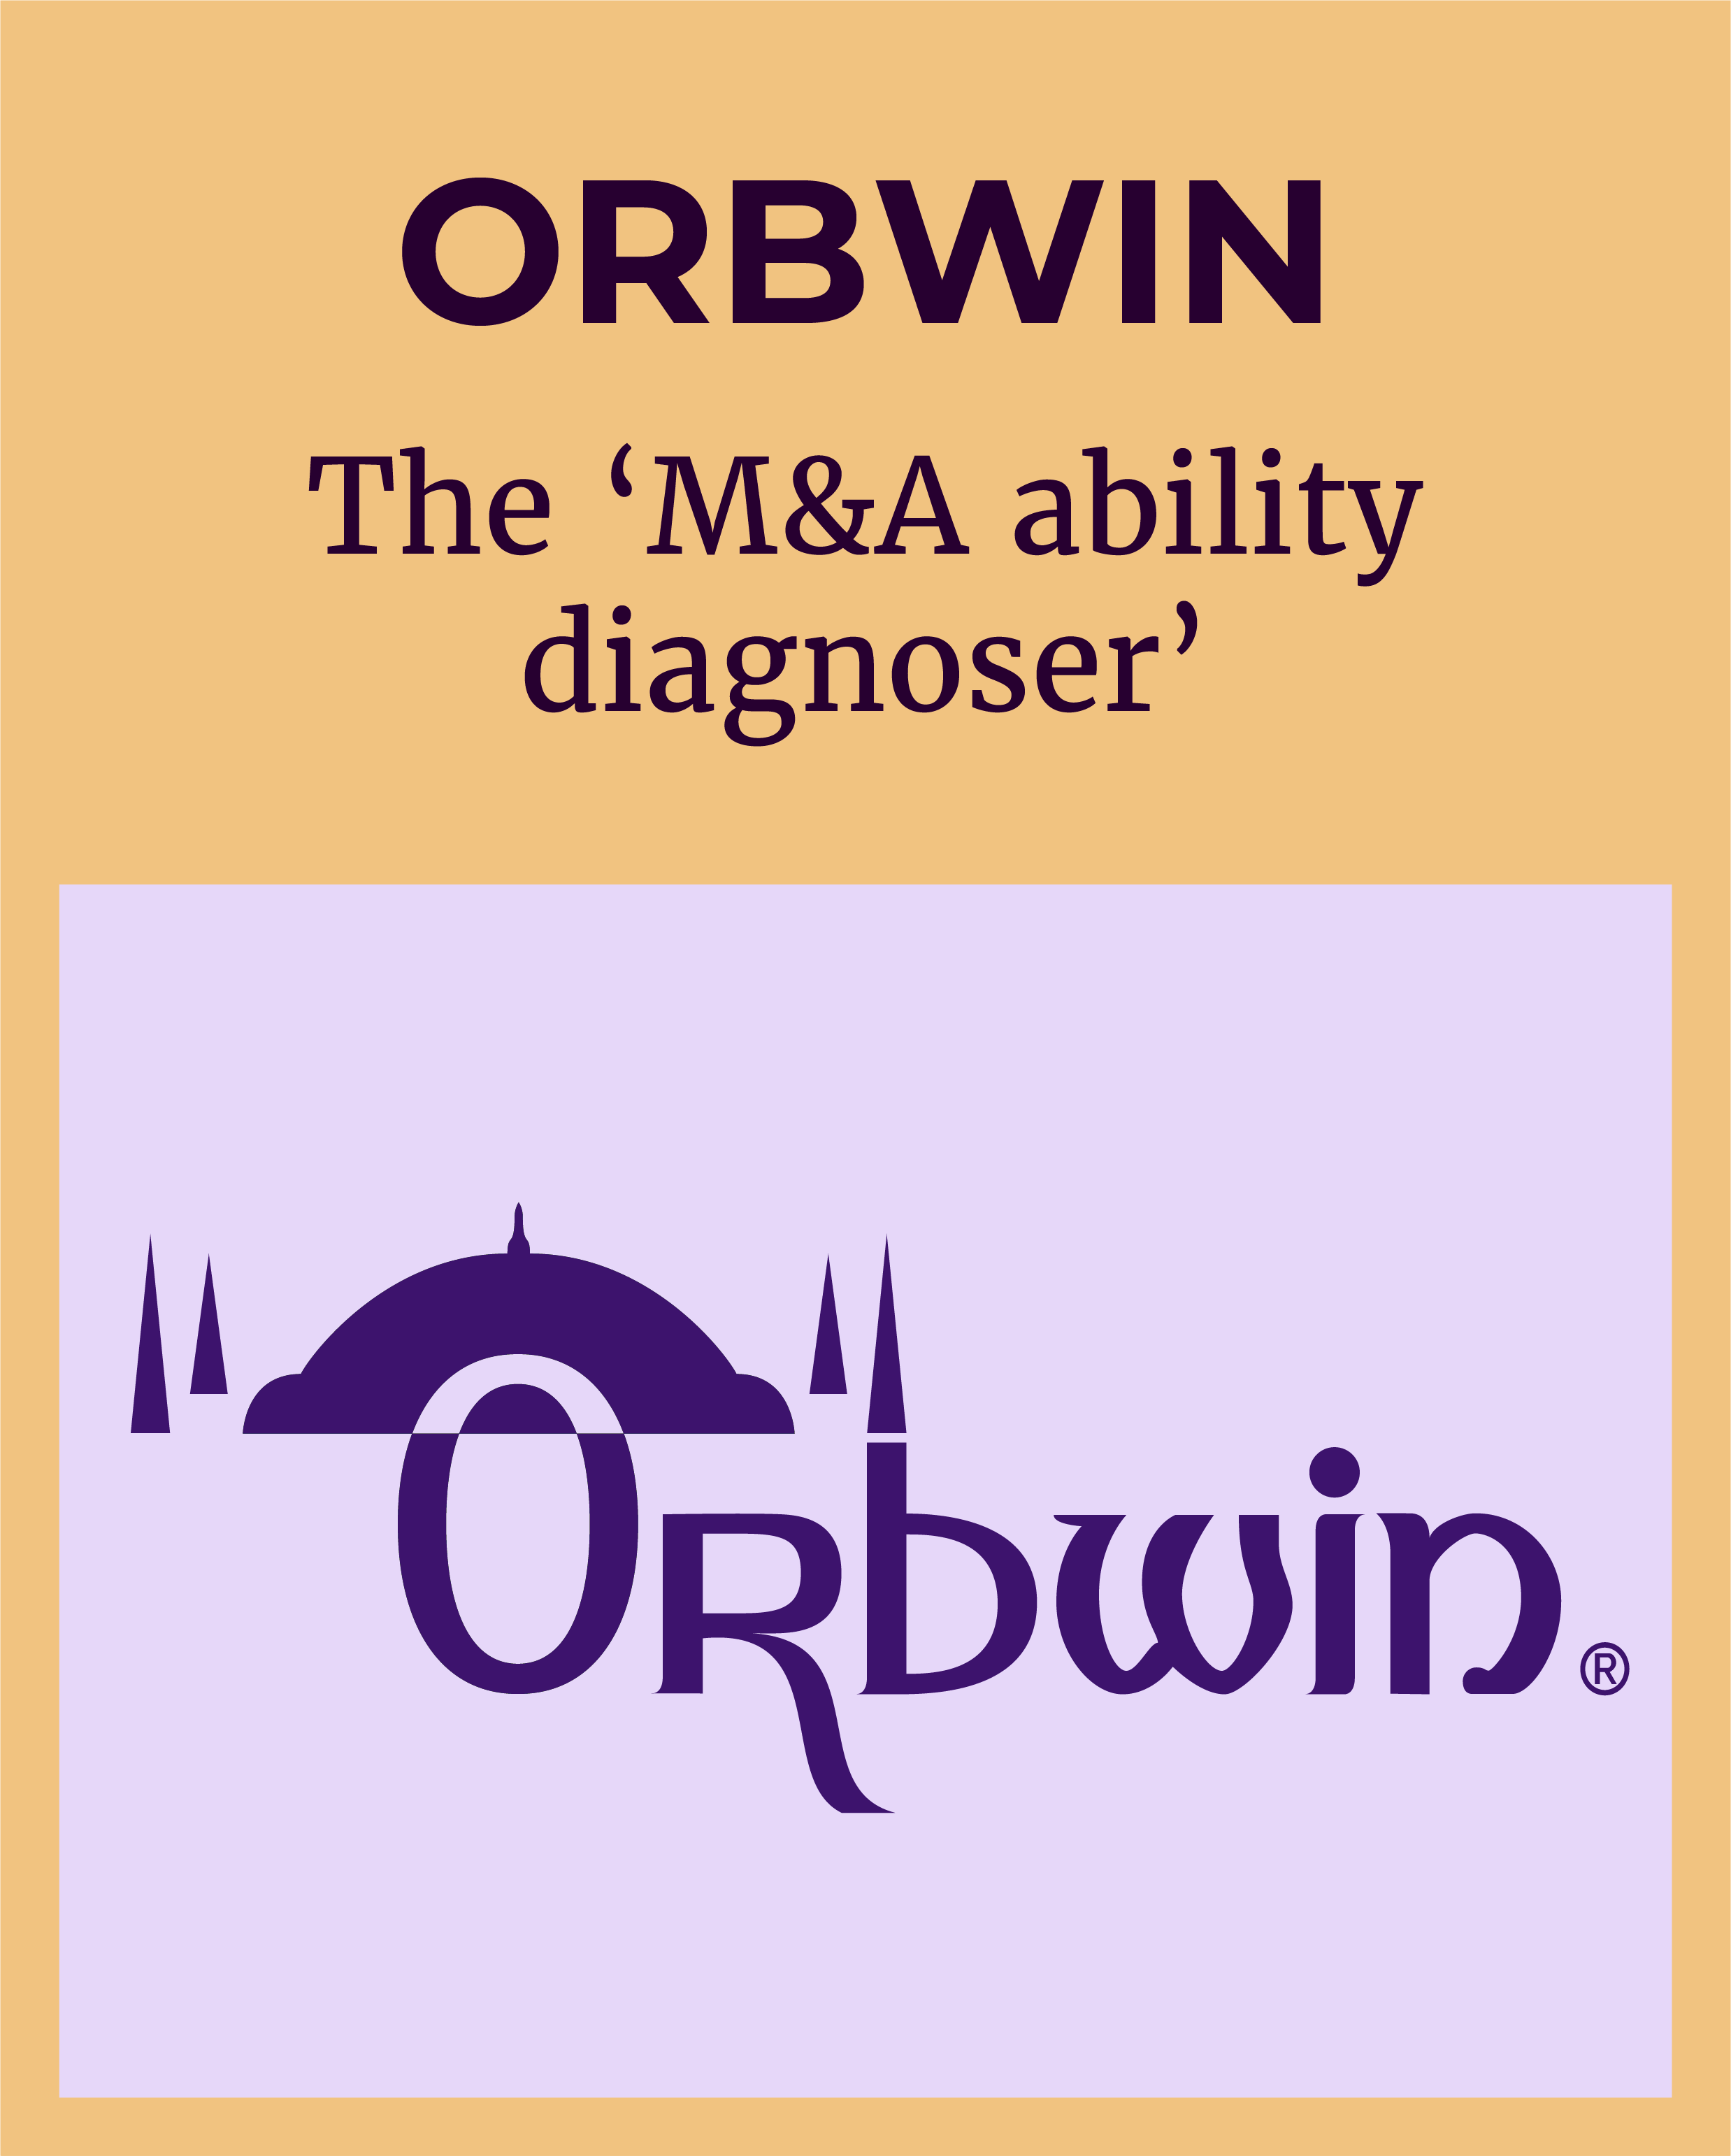 Logo of ORBWIN - the research product that is the 'M&A ability diagnoser'